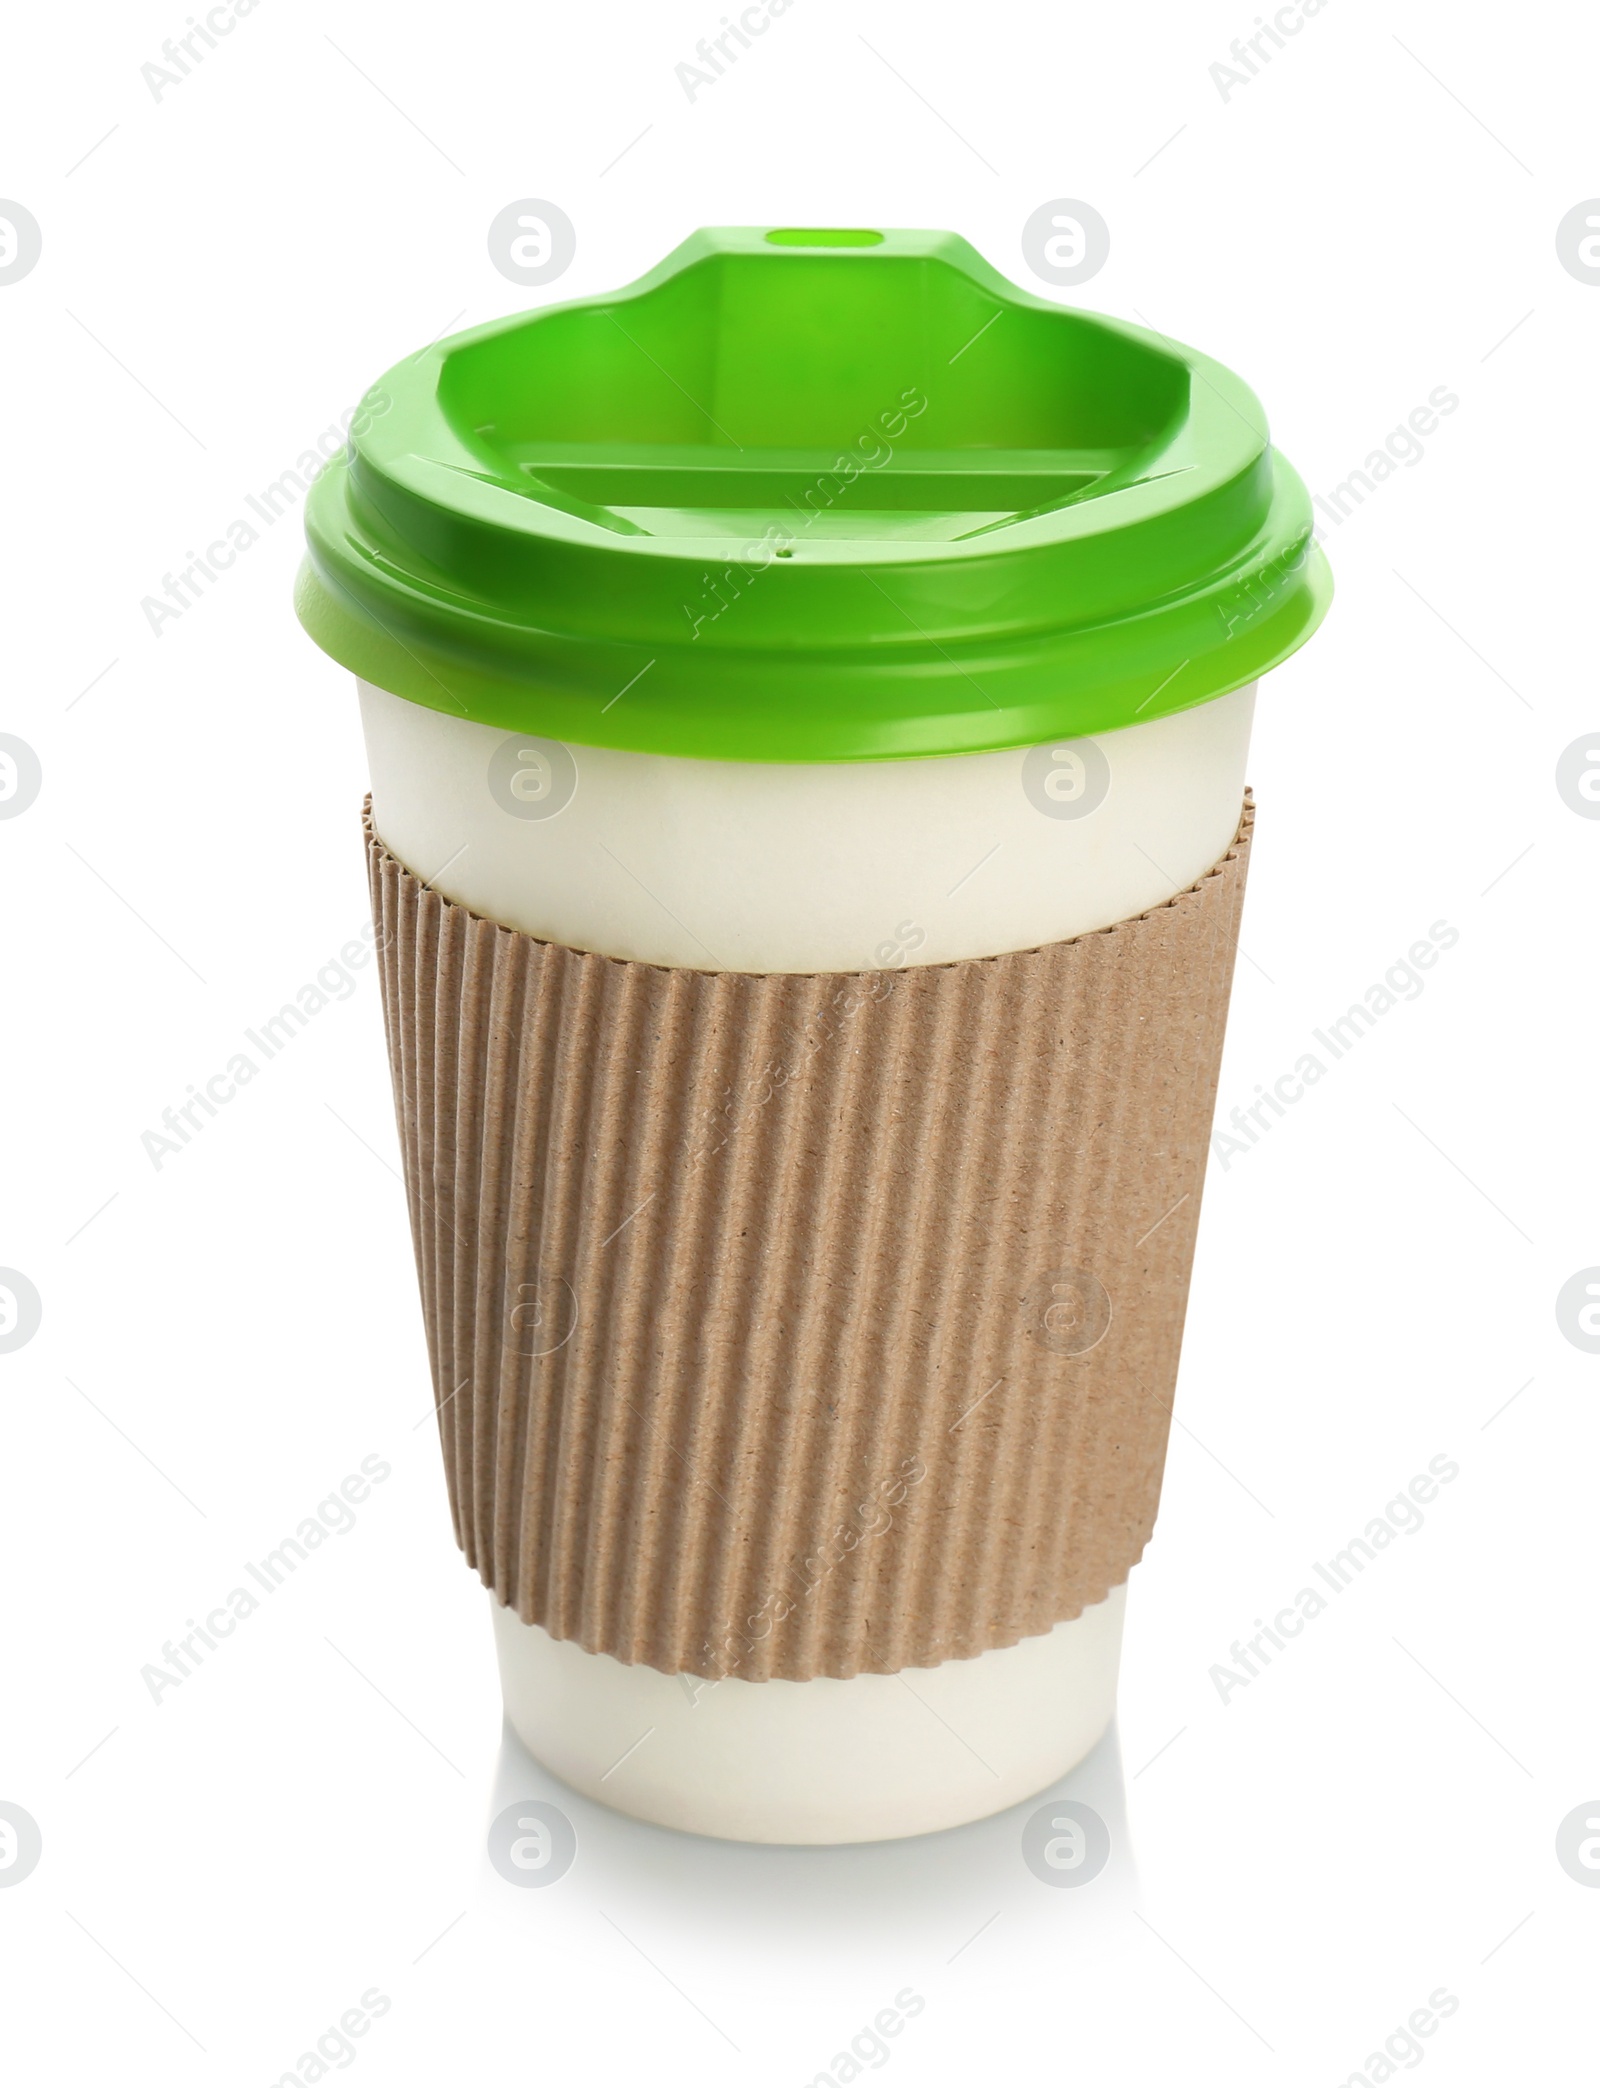 Photo of Takeaway paper coffee cup with lid and cardboard sleeve on white background